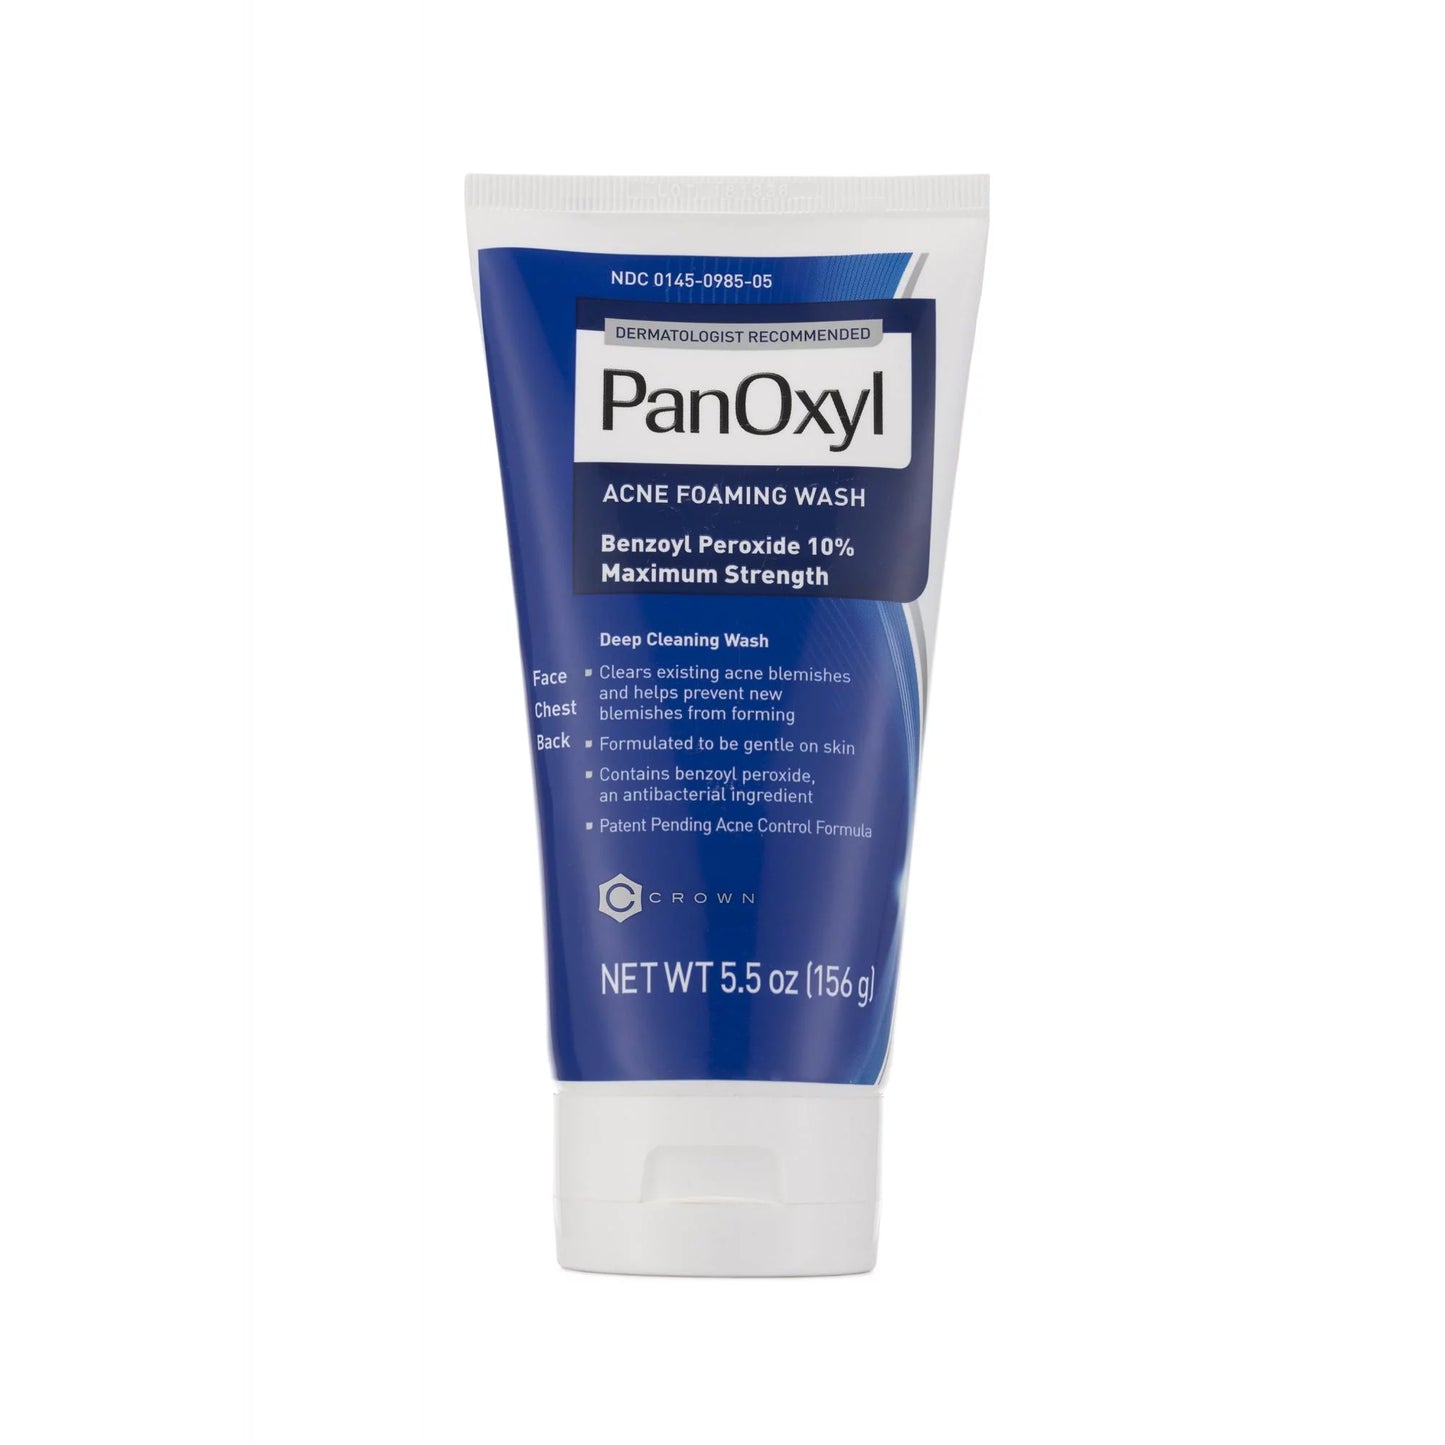 PanOxyl Acne Foaming Wash 156g